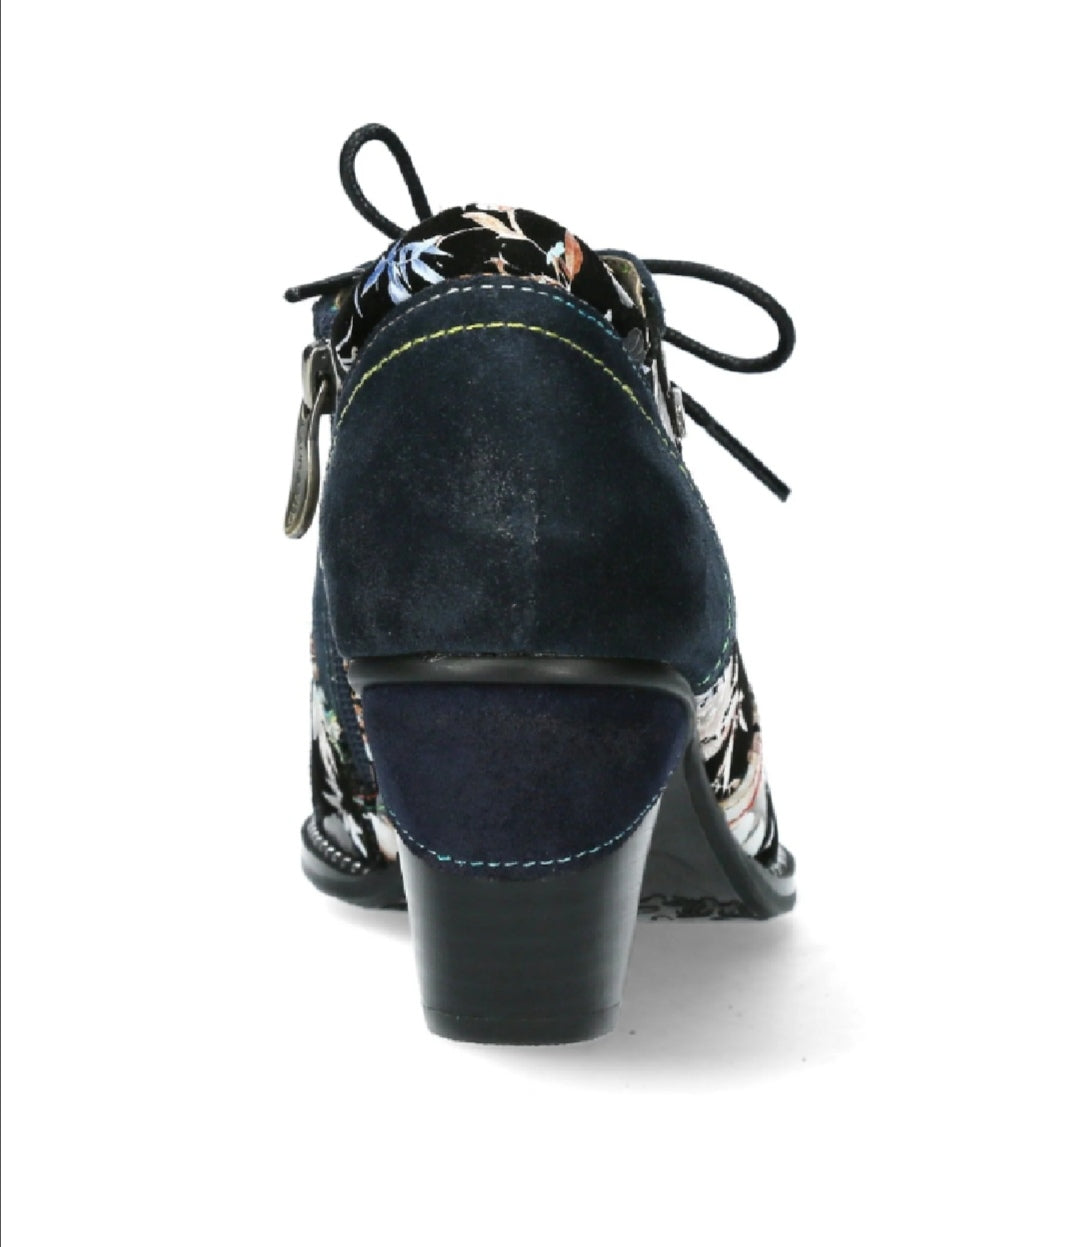 Laura Vita Alcizeeo 221 Blue Bleu Lace Up Shoe Boot with Side Zip and Mid Heel.